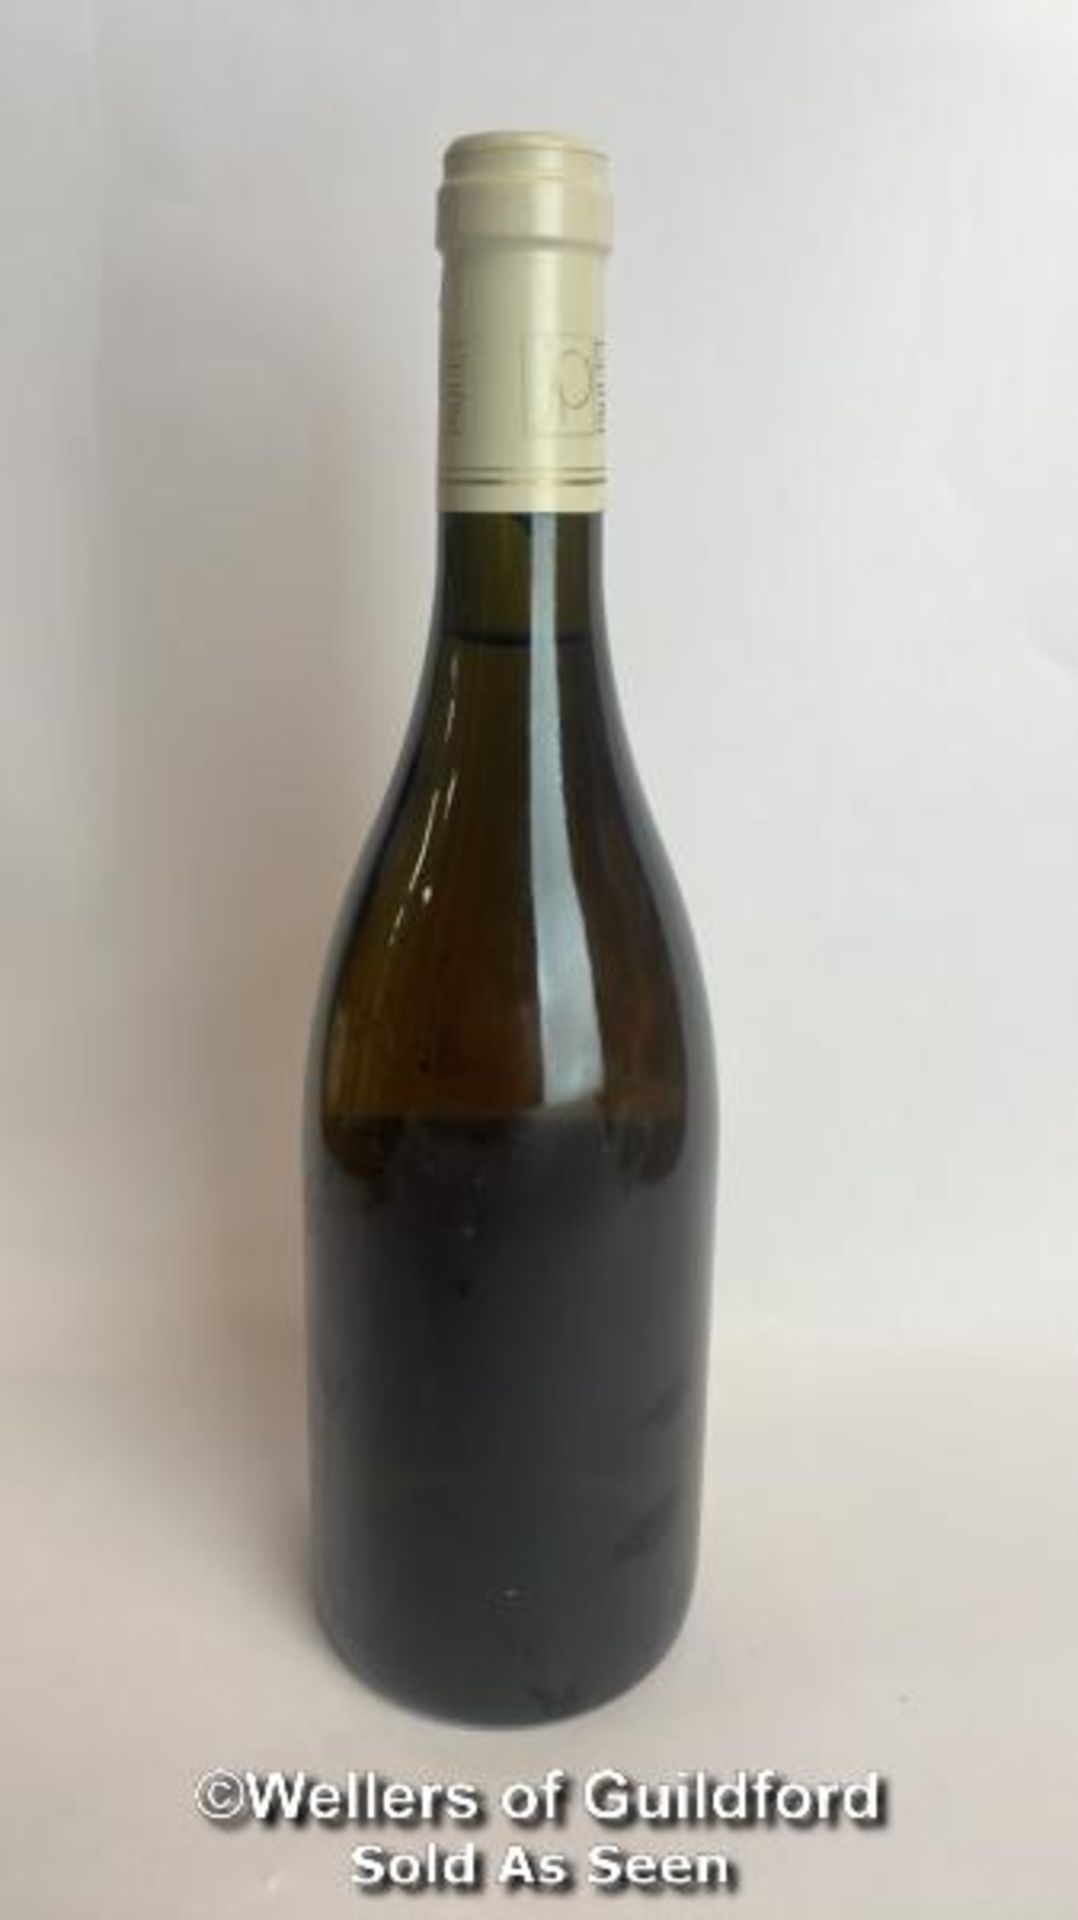 2002 Pouilly-Vinzelles White Burgandy Wine, 75cl, 13% vol / Please see images for fill level and - Image 6 of 8